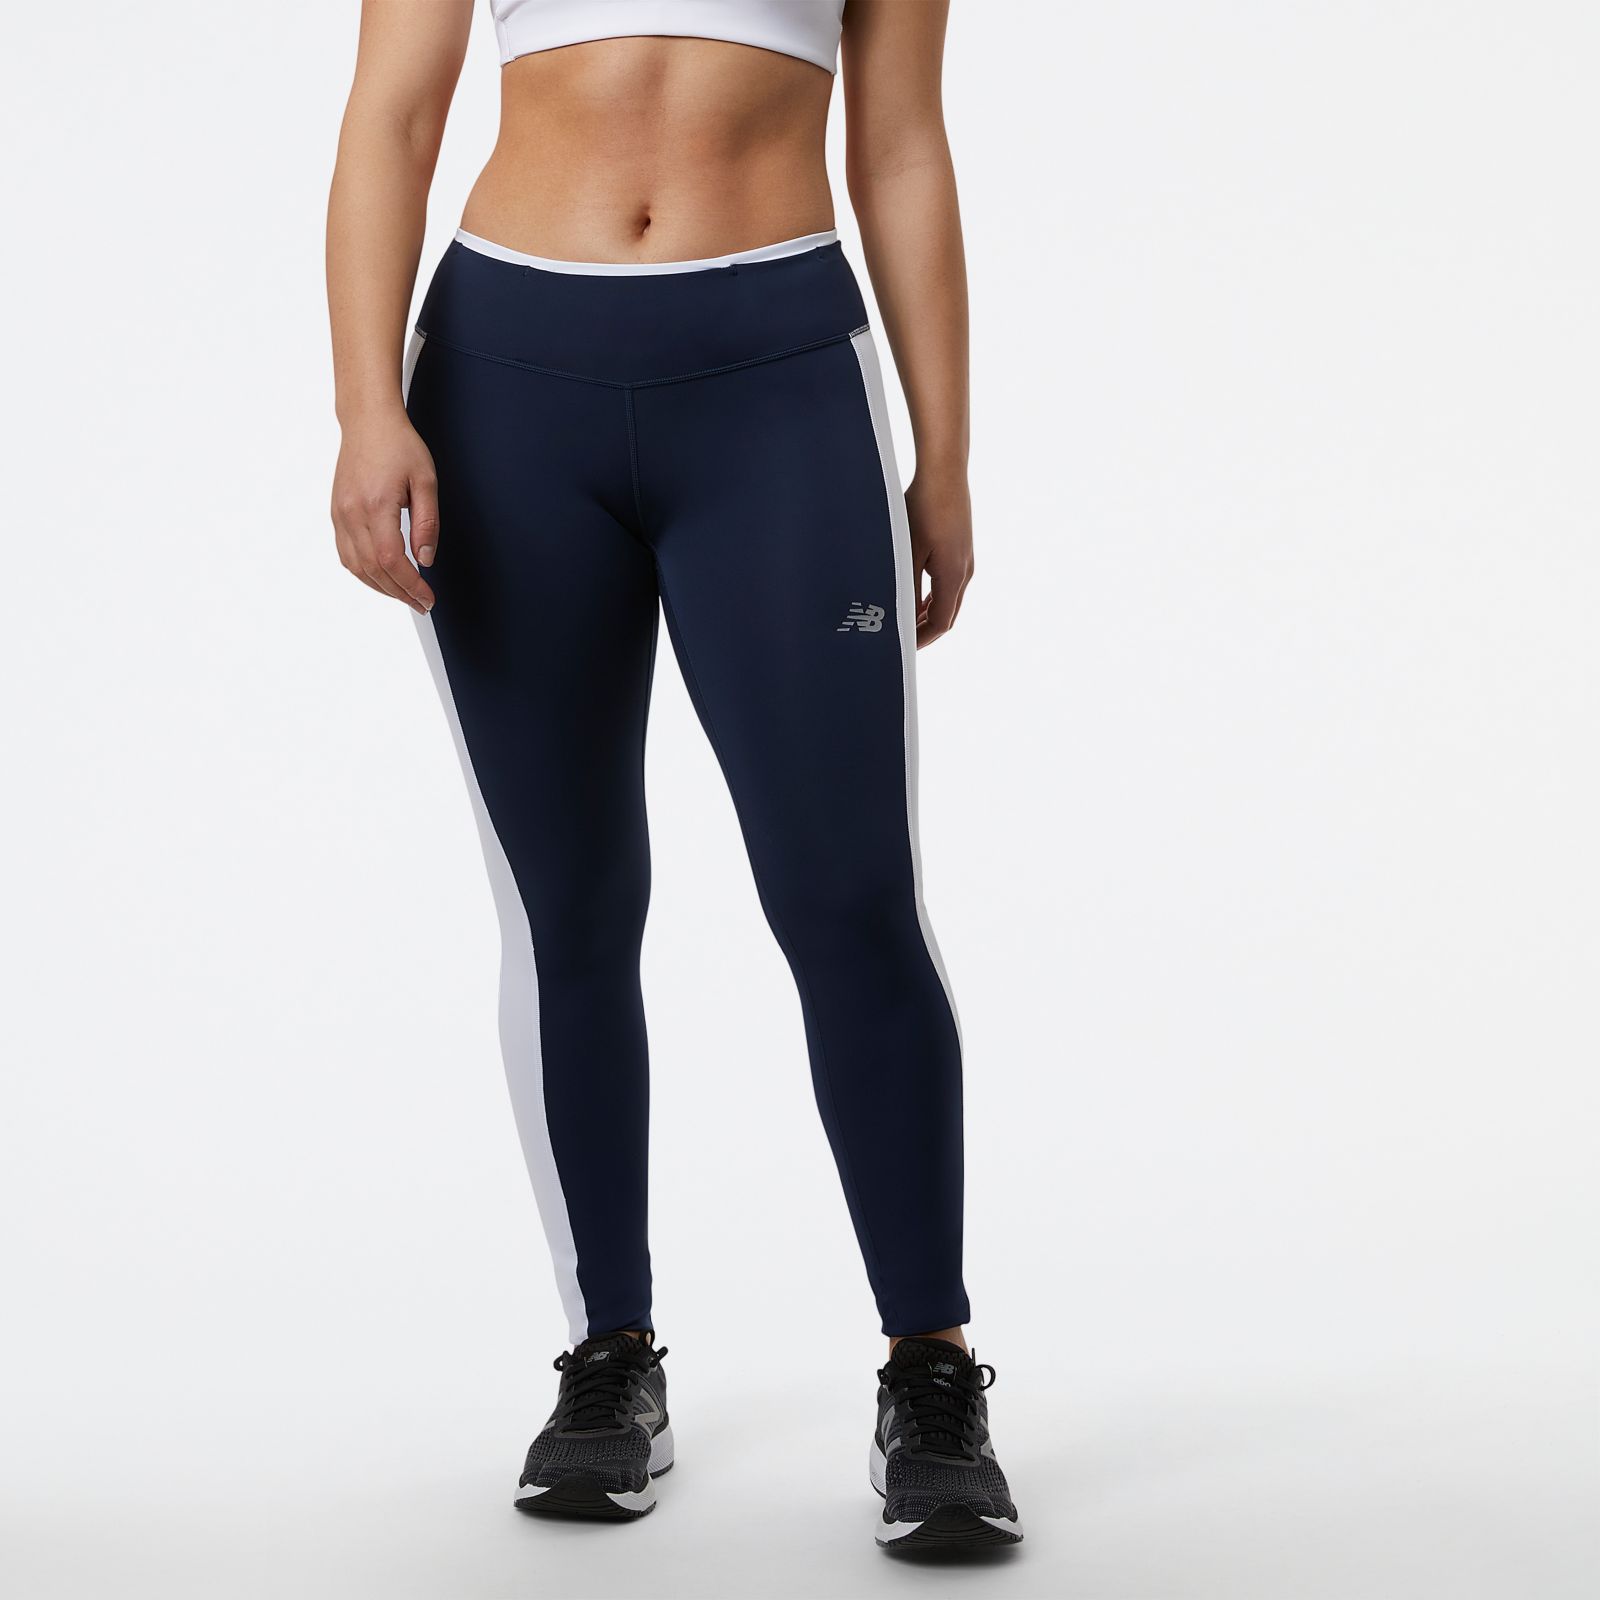 New Balance Accelerate Women's Tights - Free Shipping